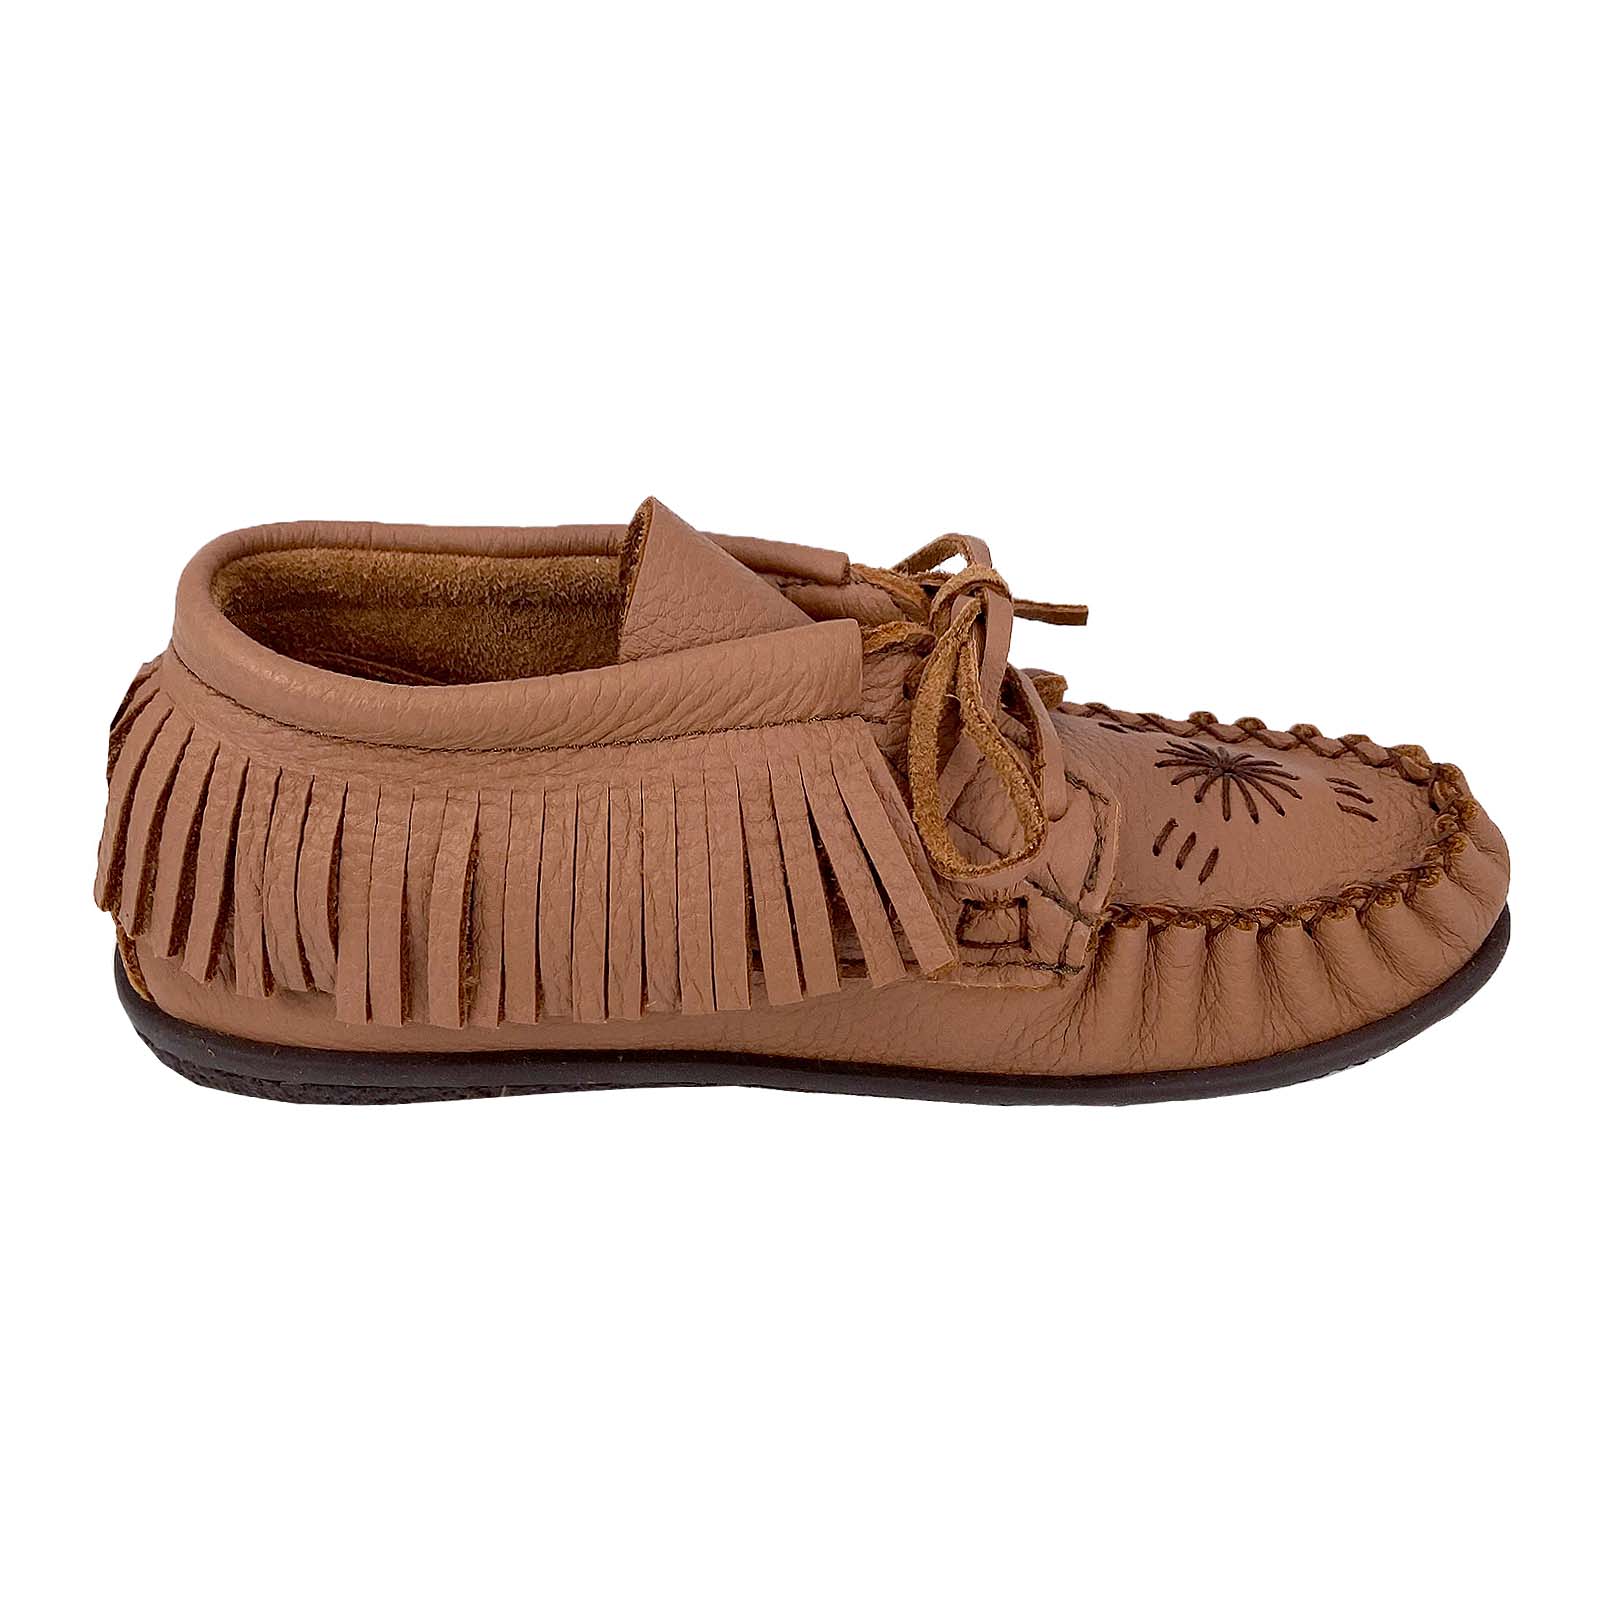 Women's Fringed Embroidered Ankle Moccasins